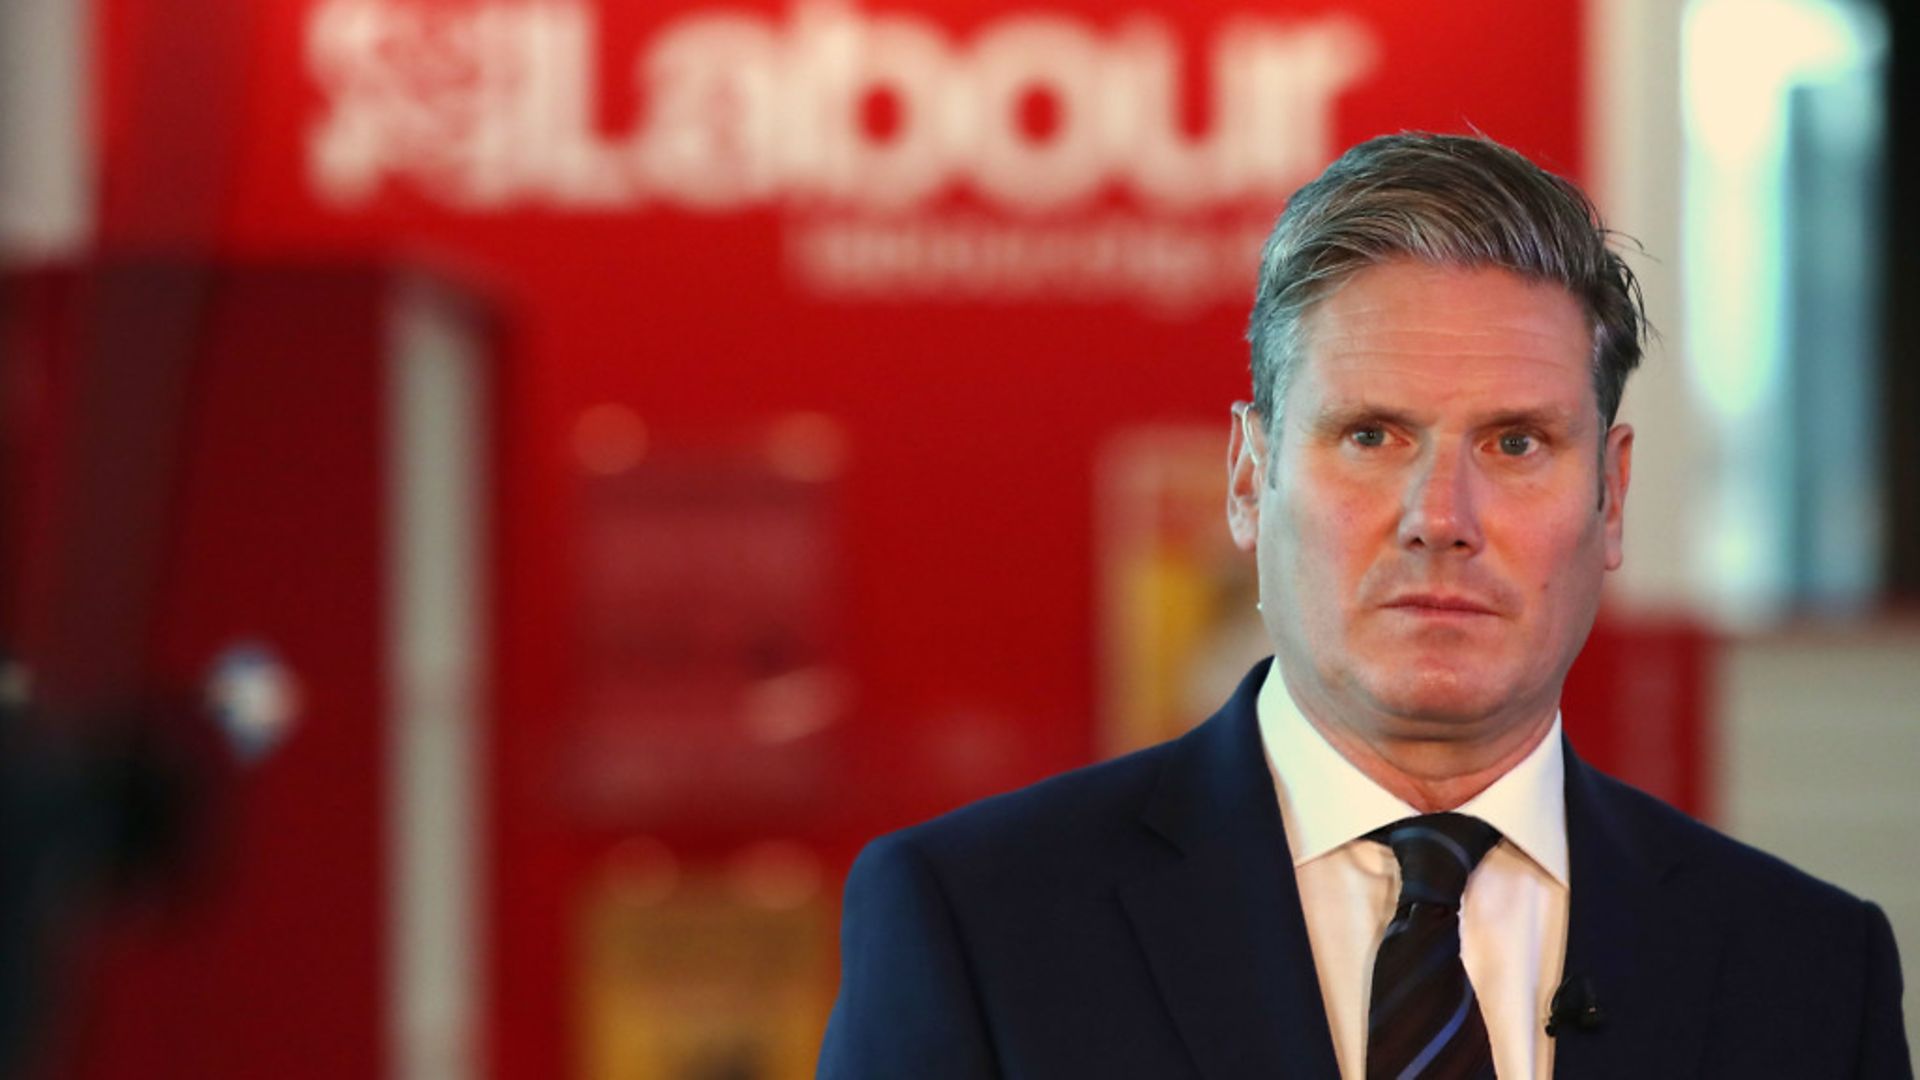 Labour leader Keir Starmer. Photograph: Peter Byrne/PA Wire - Credit: PA